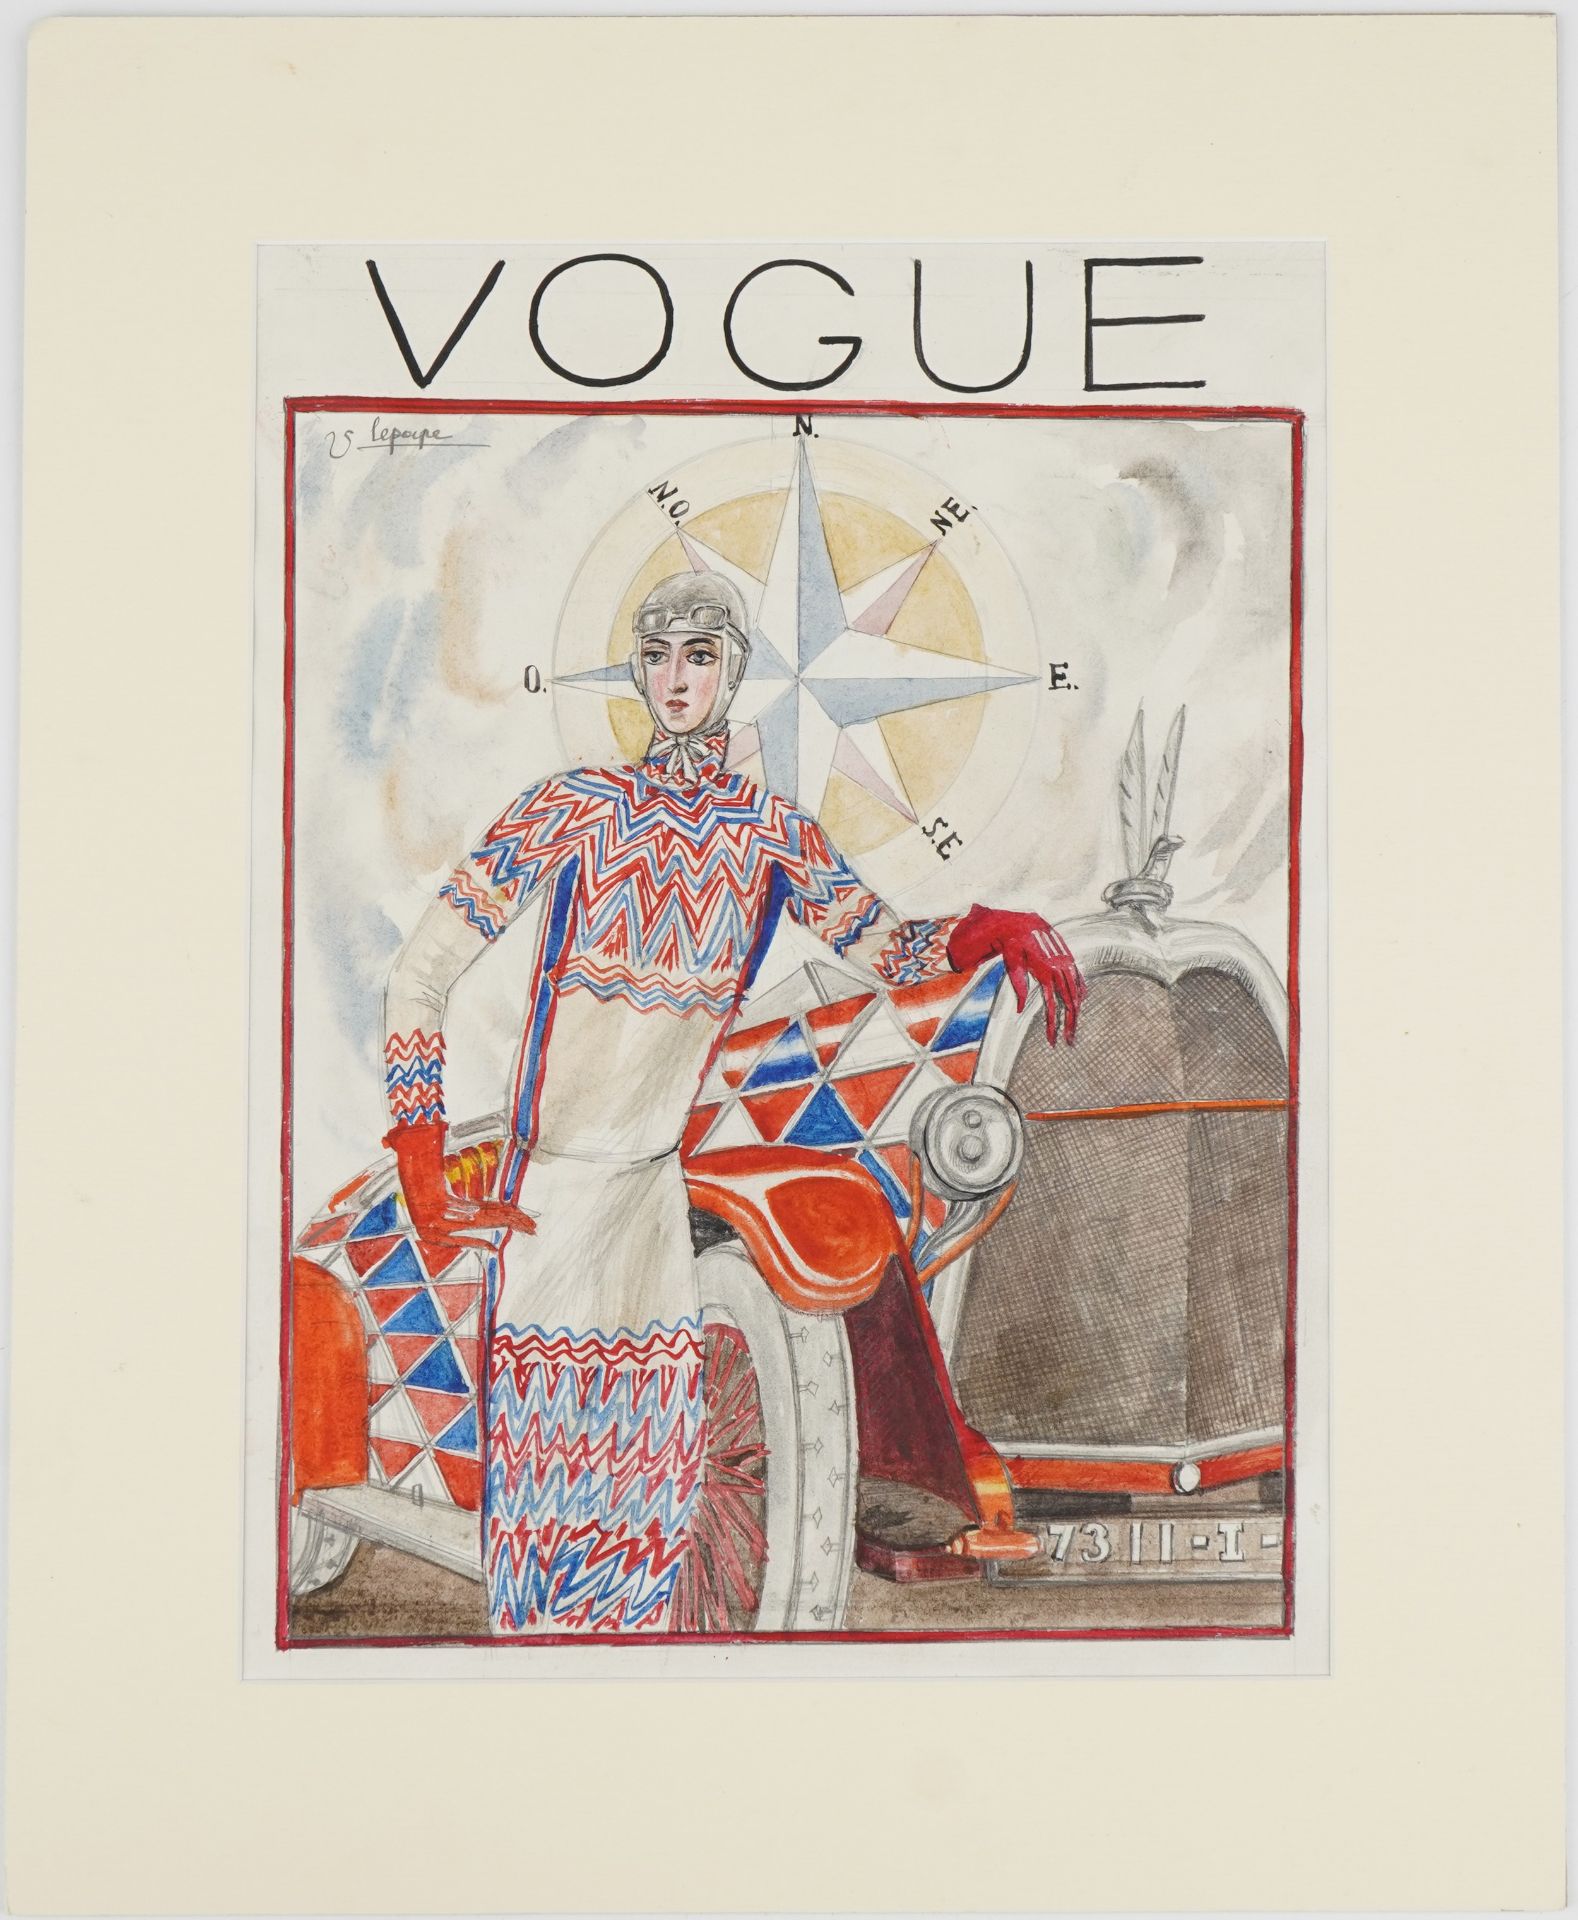 Georges Lepape - Vogue front cover, Sonia Delaunay before a classic car and compass, French - Image 2 of 5